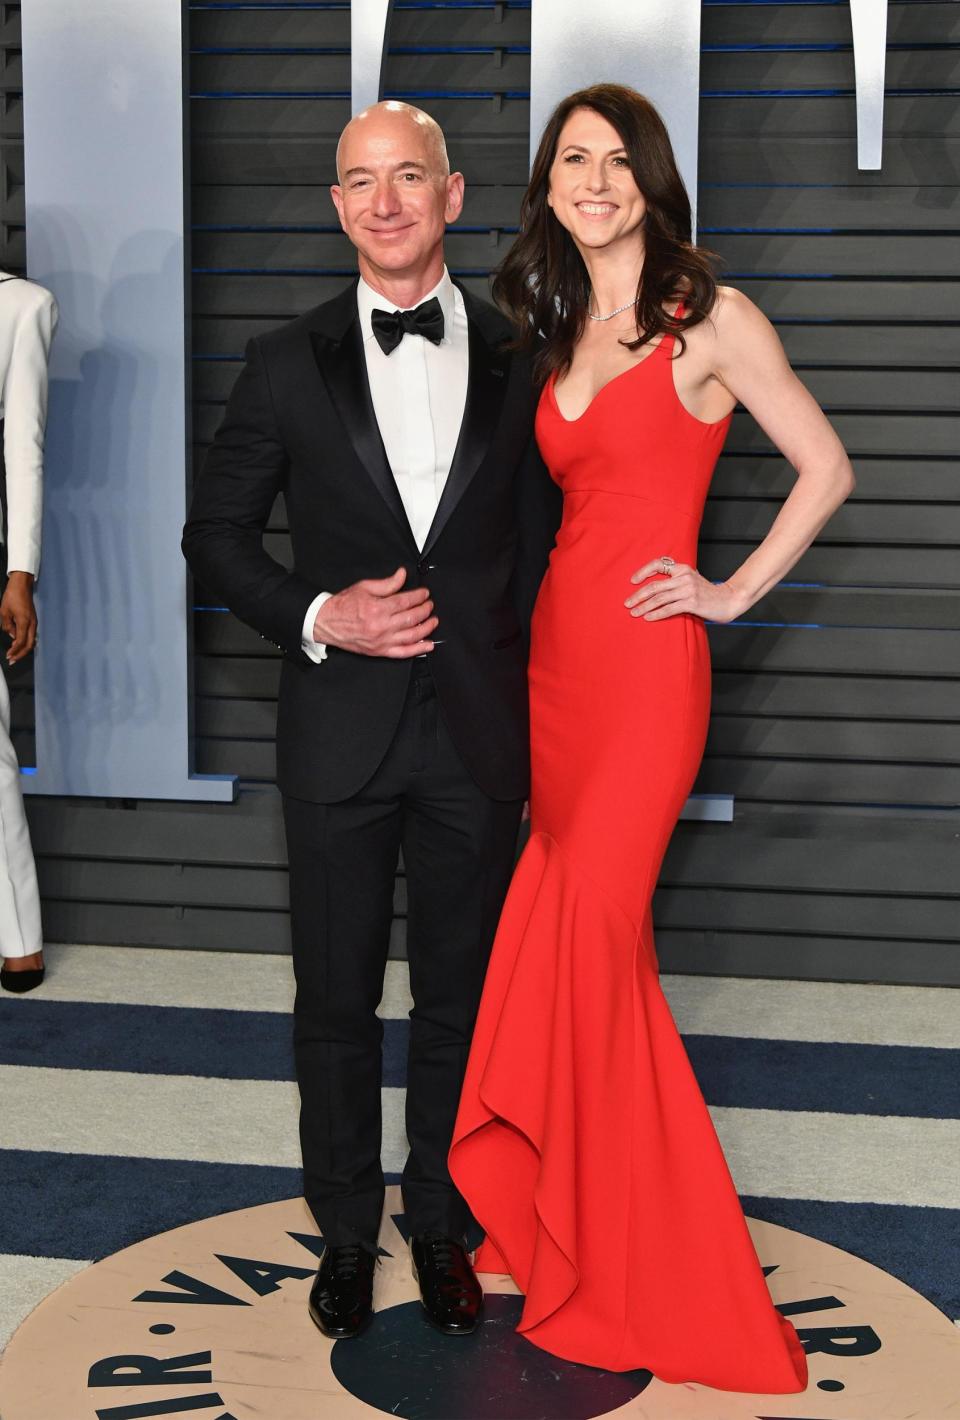 Jeff Bezos (L) and MacKenzie Bezos attend the March 2018 Vanity Fair Oscar Party (Getty Images)